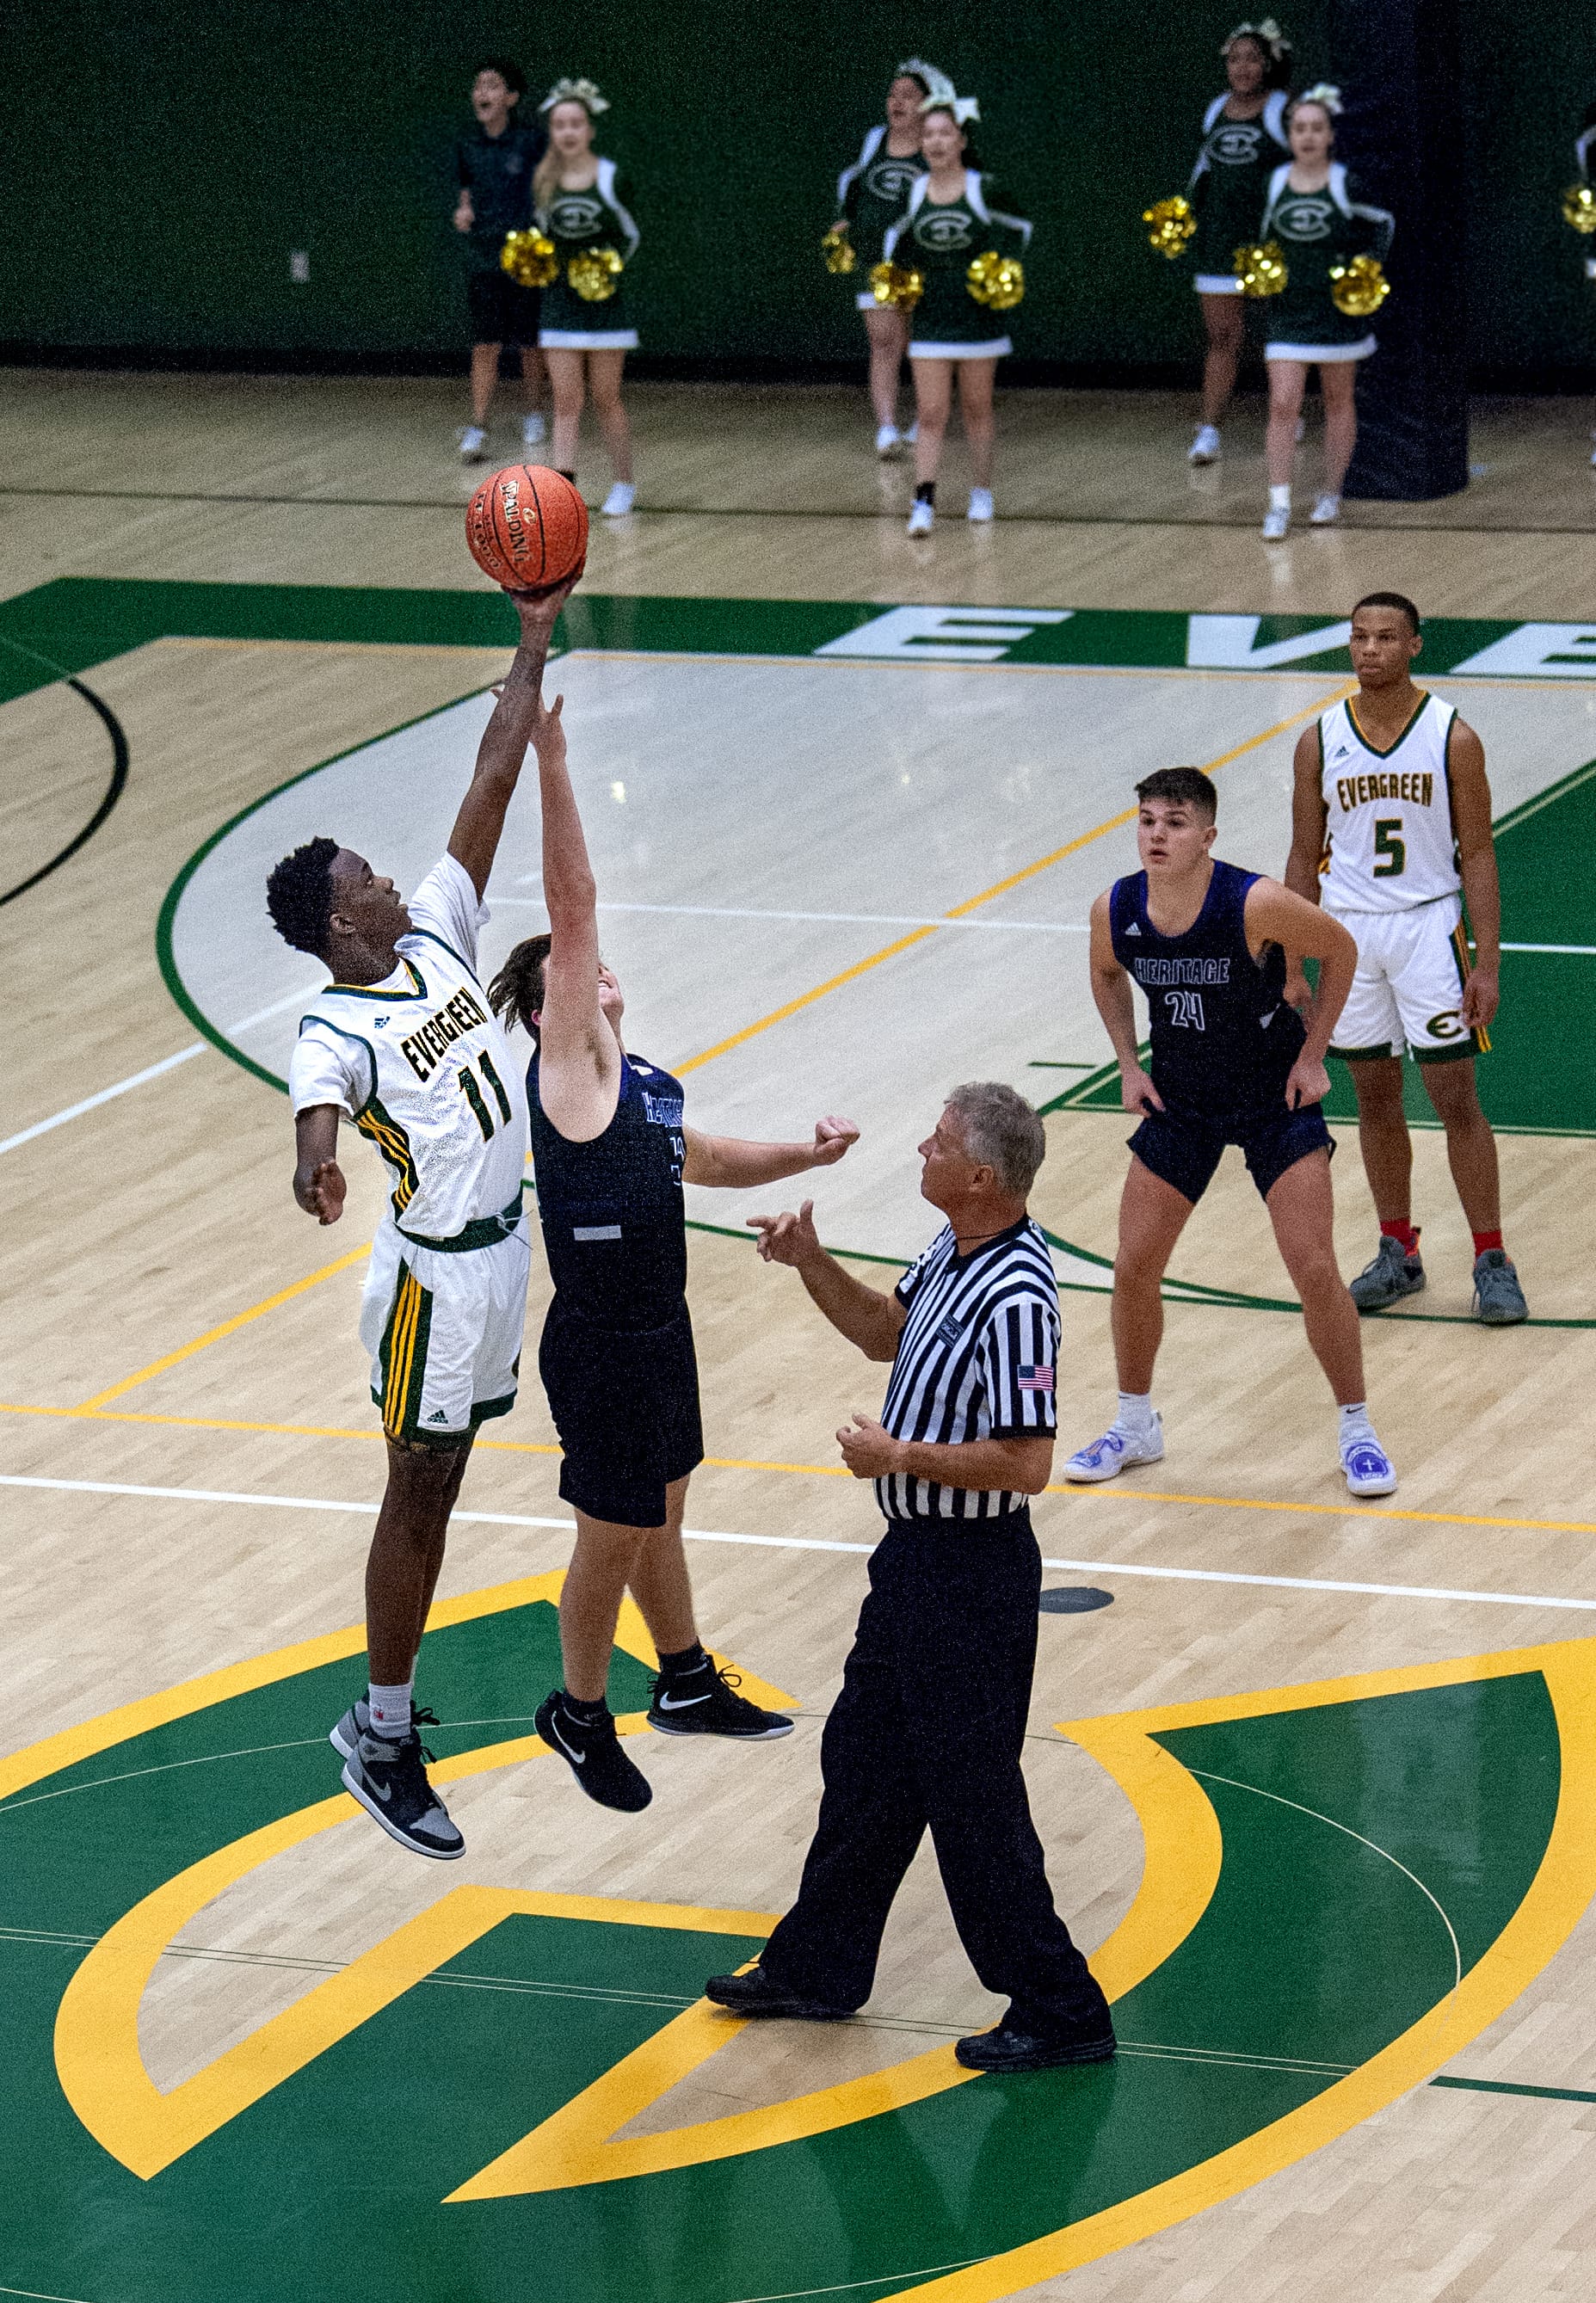 Evergreen’s Mario Herring, left, wins a tipoff over Heritage’s Drew Gray in a nonleague basketball game Tuesday at Evergreen High School. Most Clark County basketball teams begin their 2019-20 season this week.